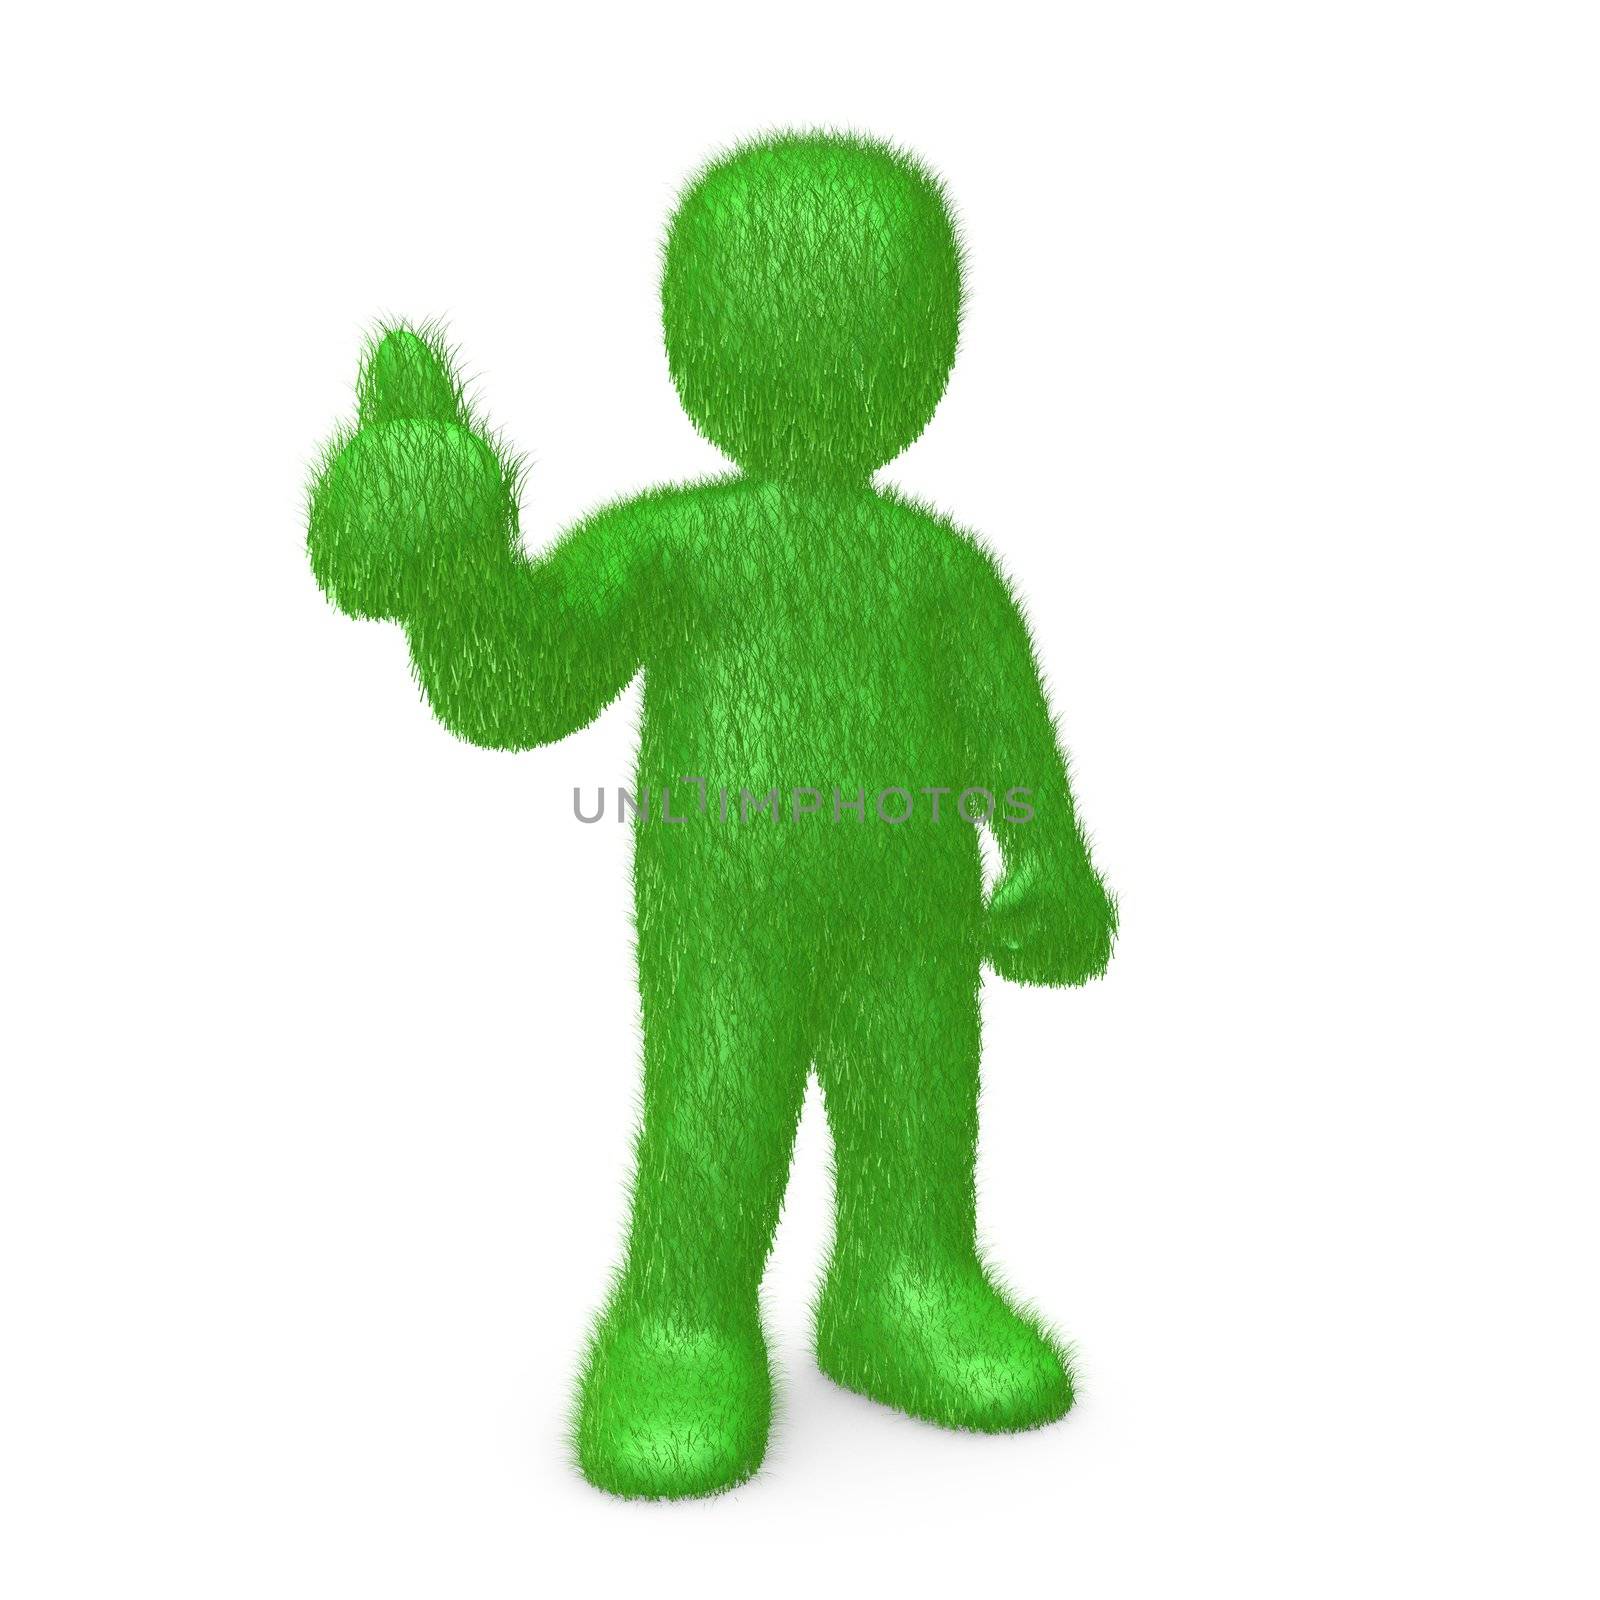 Computer generated image - Go Green .